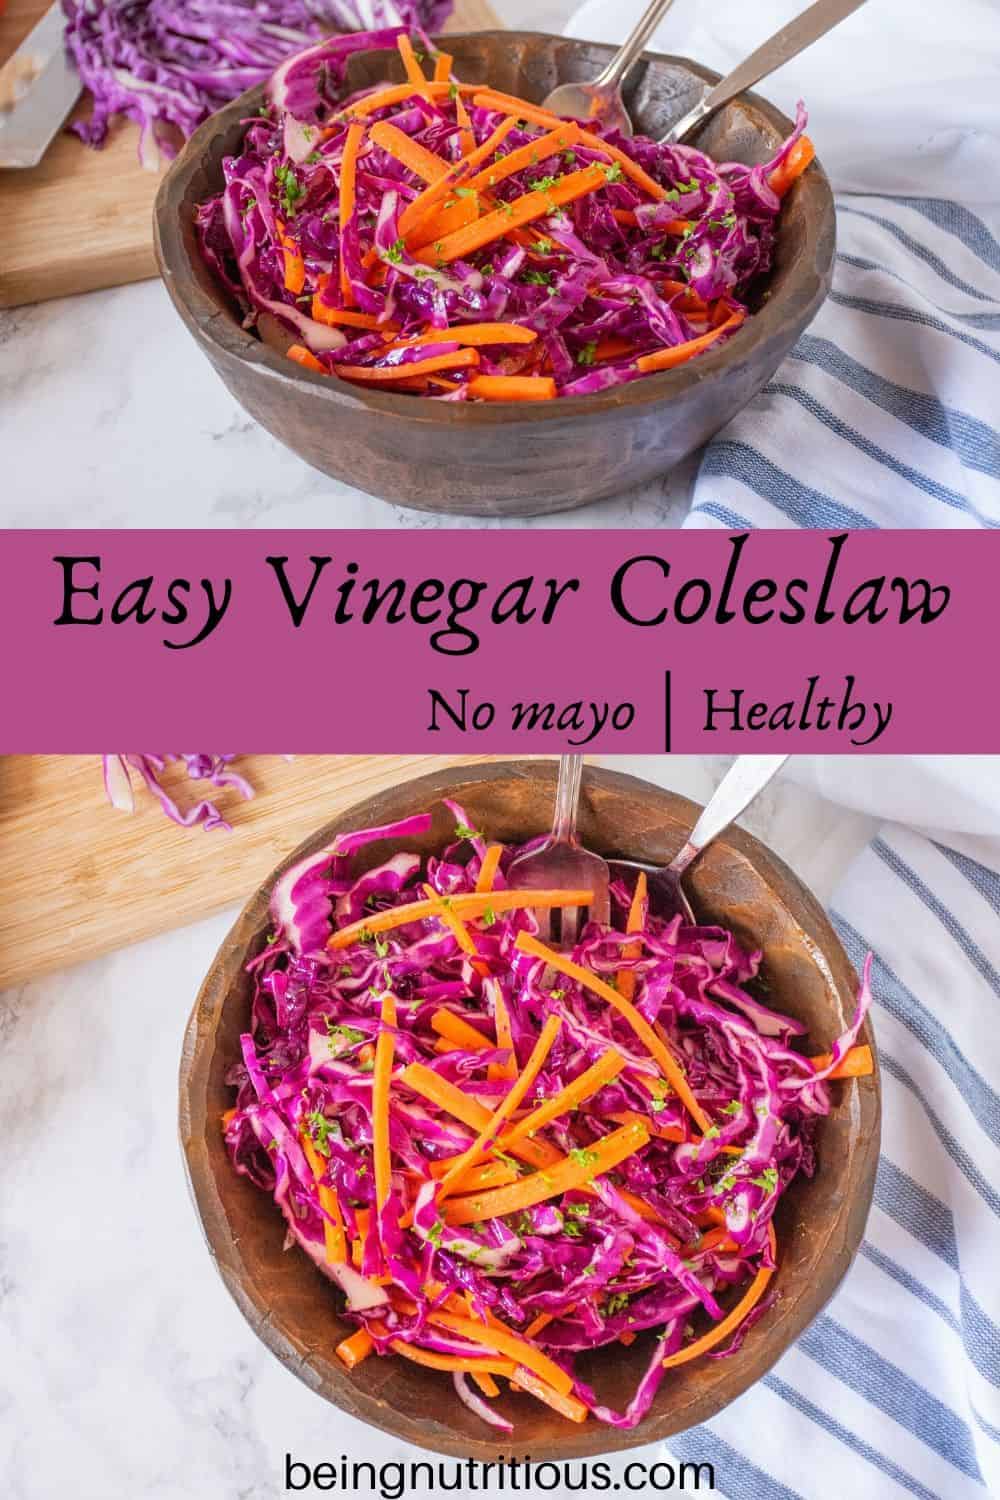 Stacked image. Top image is of vinegar coleslaw in a wooden bowl with shredded cabbage visible in the background on a cutting board. Bottom image is an overhead shot of the coleslaw in a bowl.